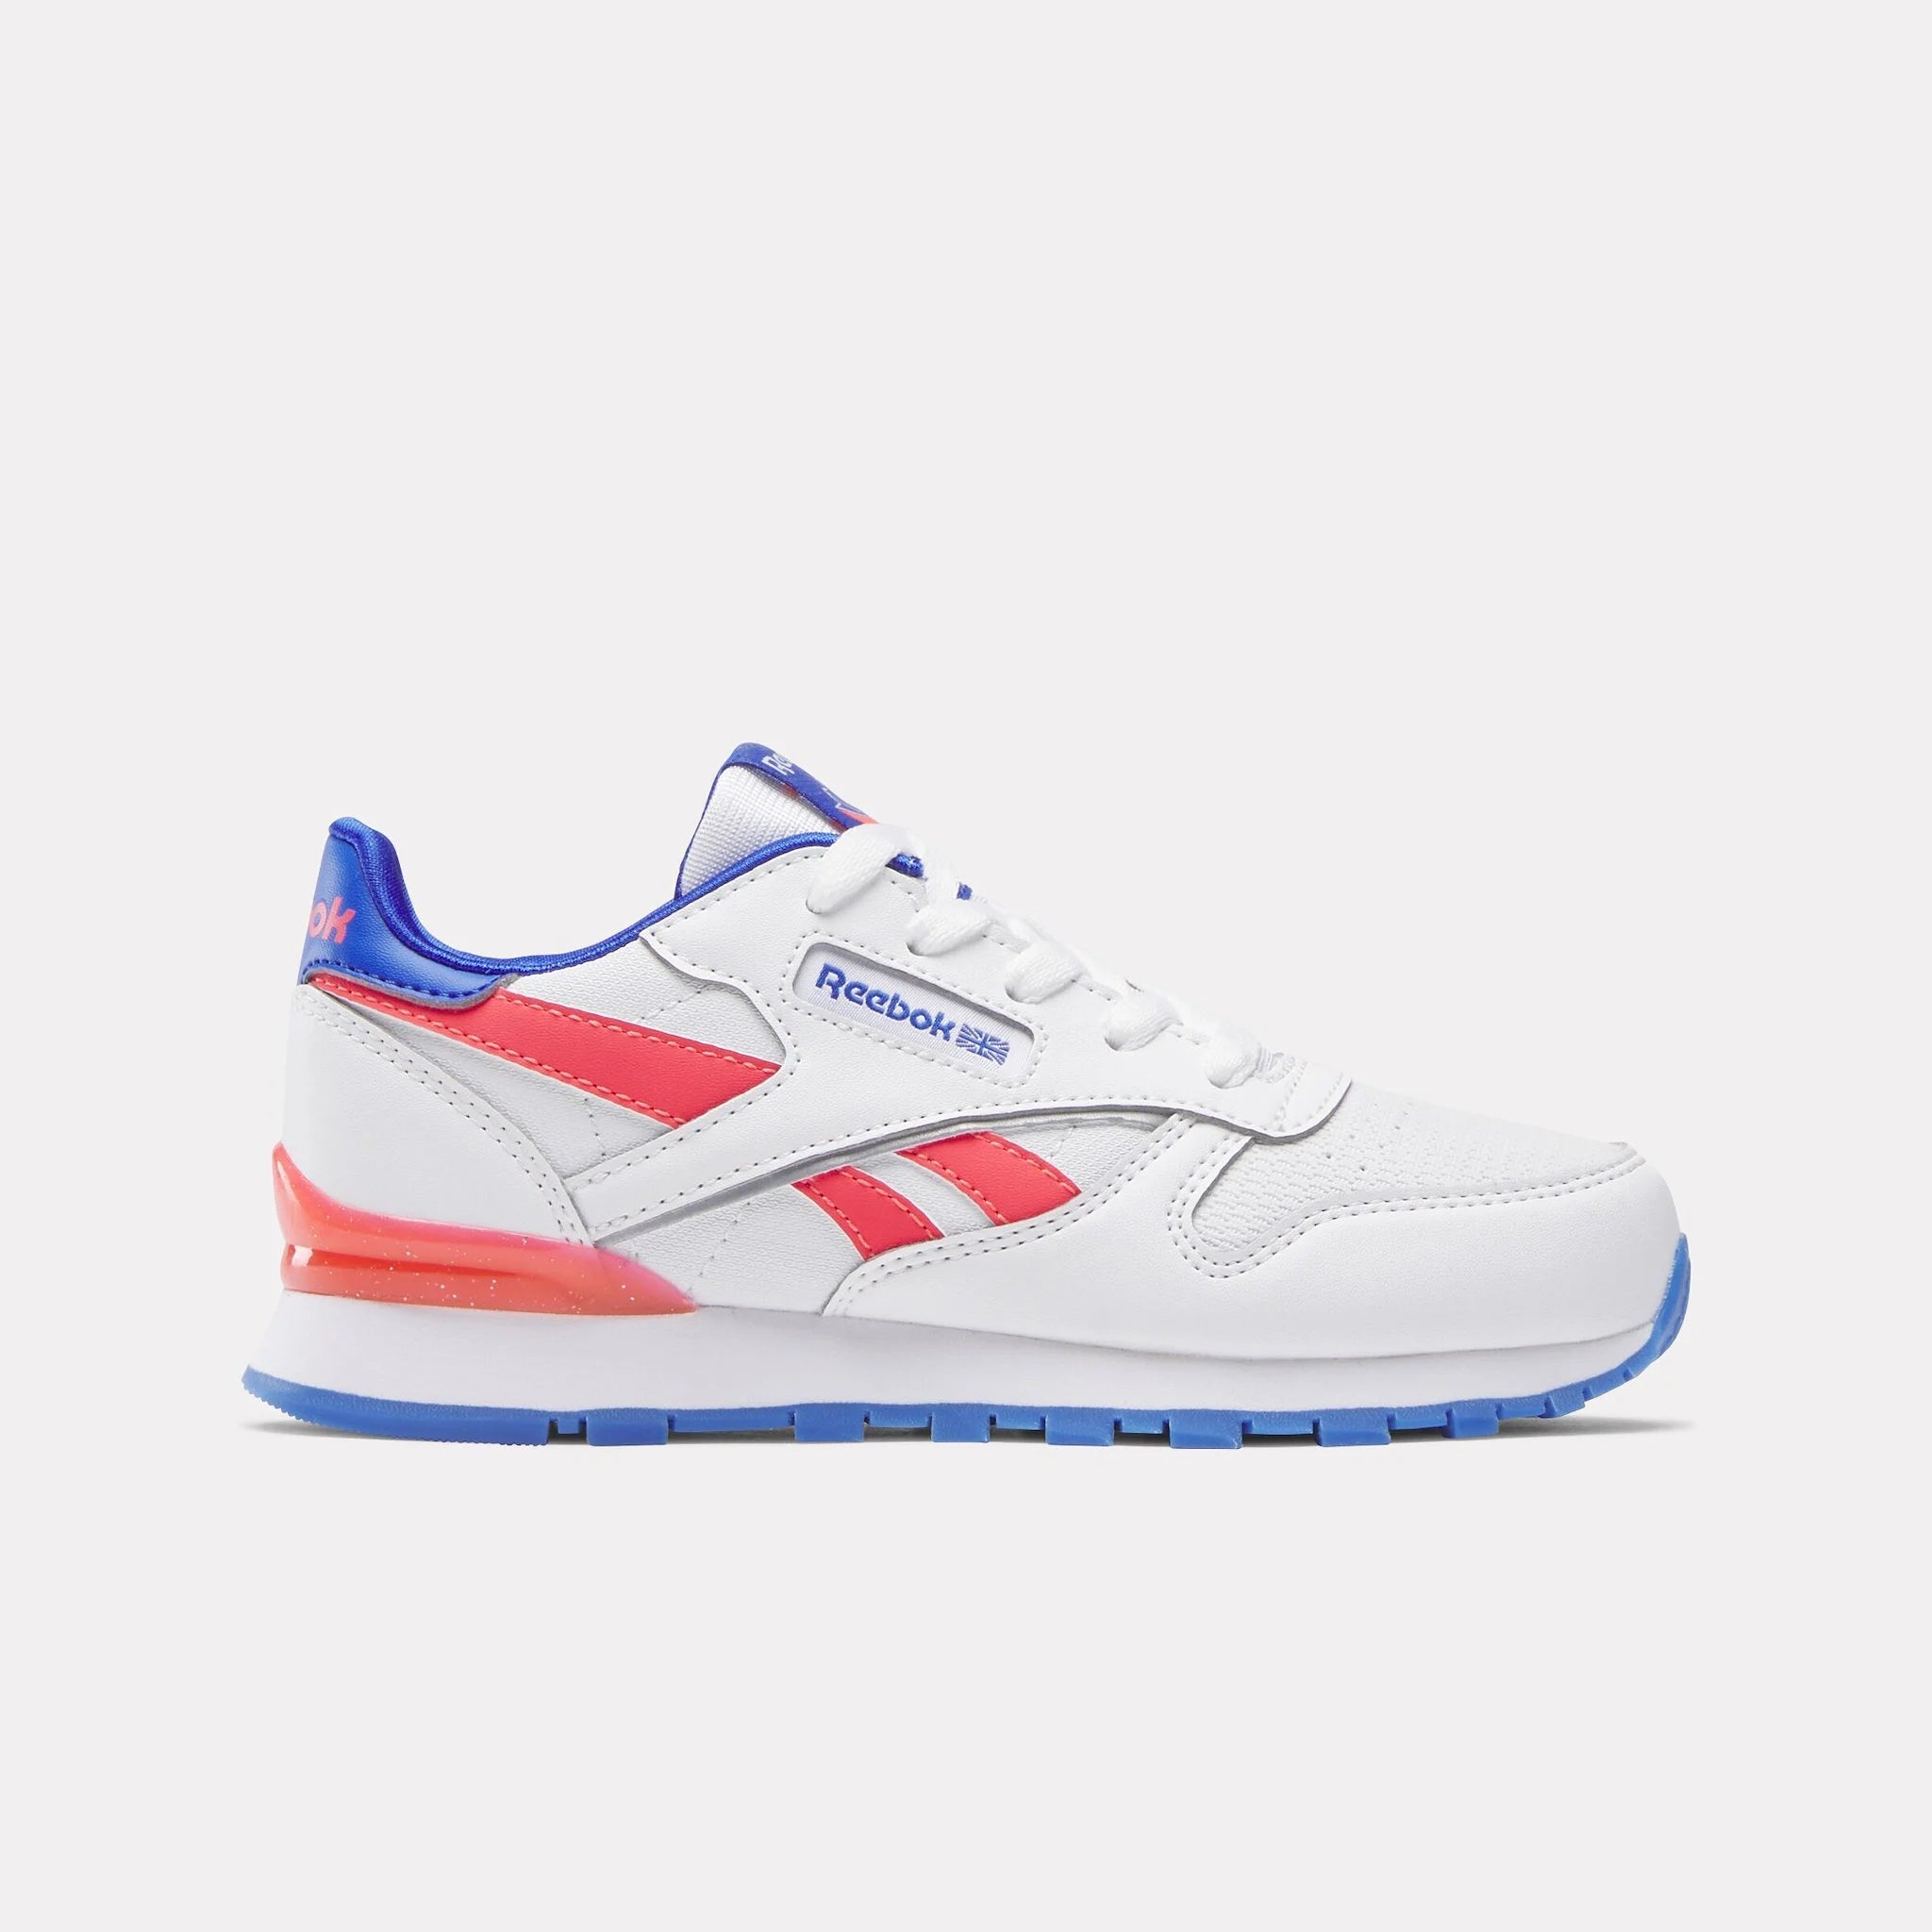 Reebok REEBOK INFANTS Classic Leather Step N Flash BLUE/RED SHOES - INSPORT